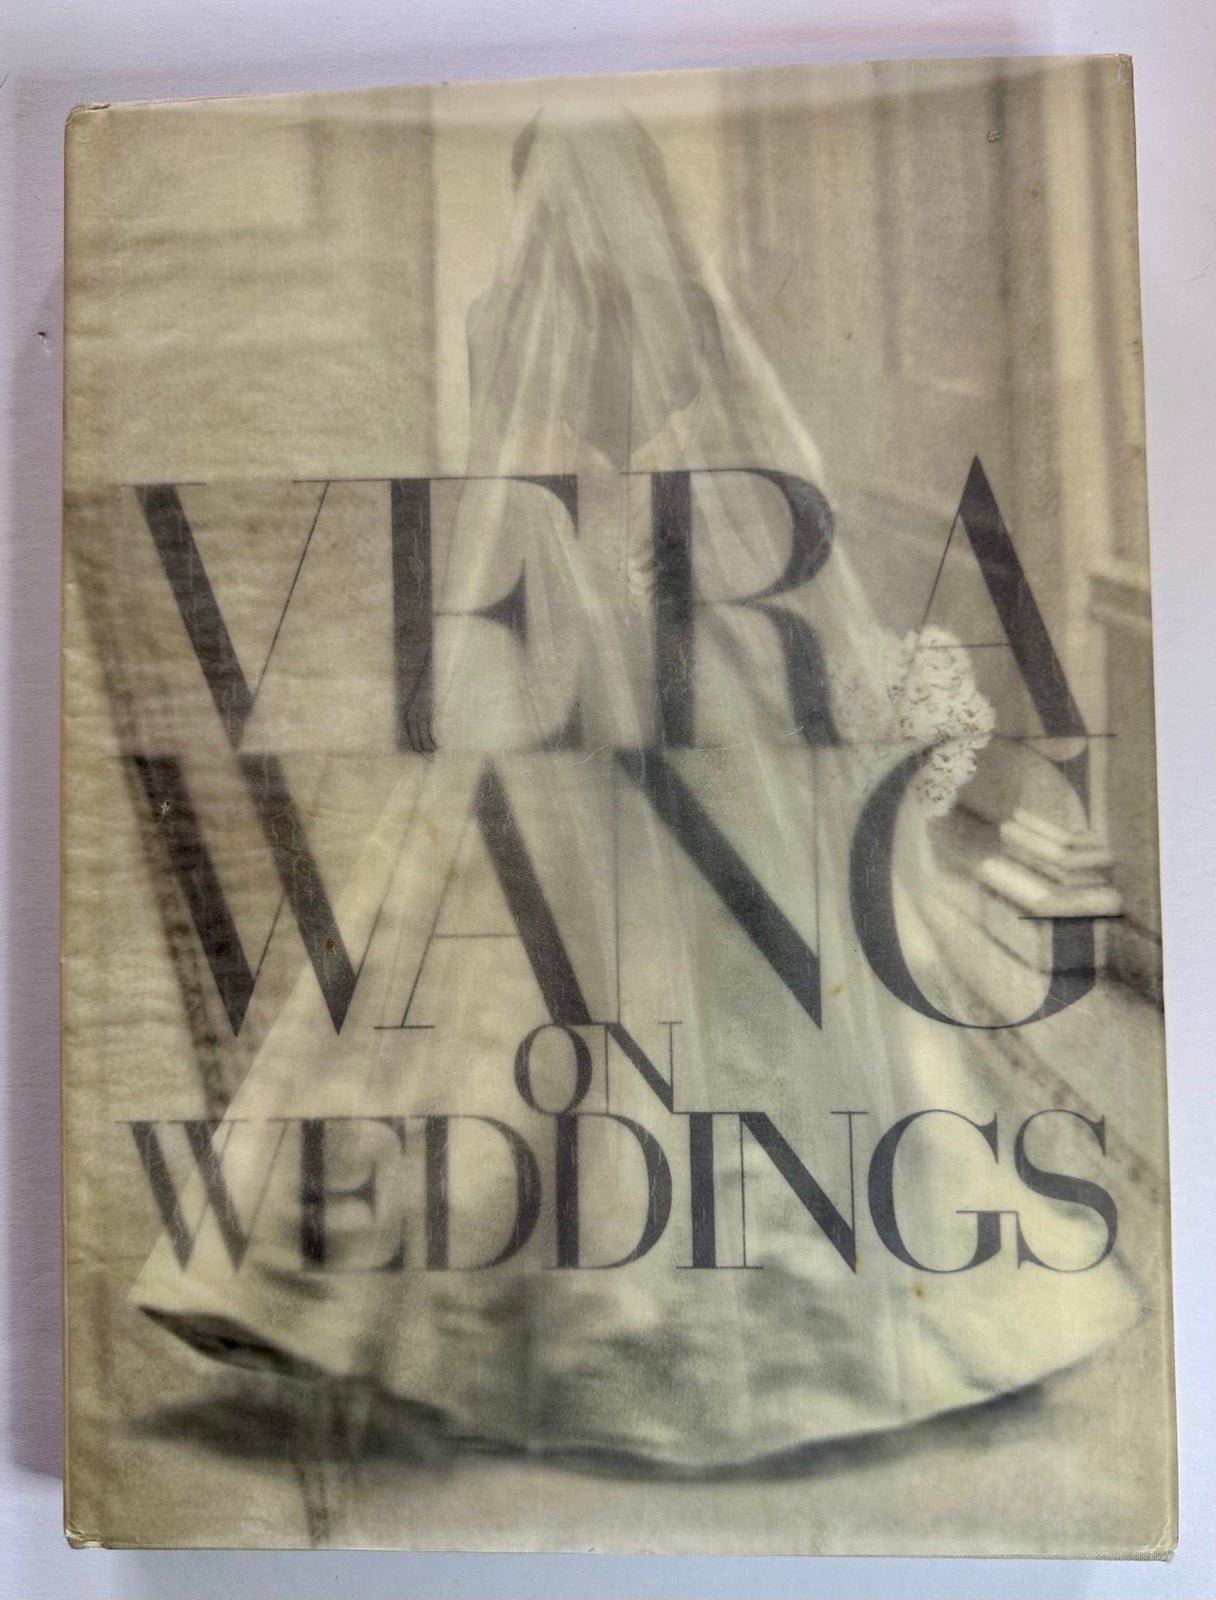 Vera Wang On Weddings - Large Hardcover By Wang, Vera - First Edition fub0ho8NF